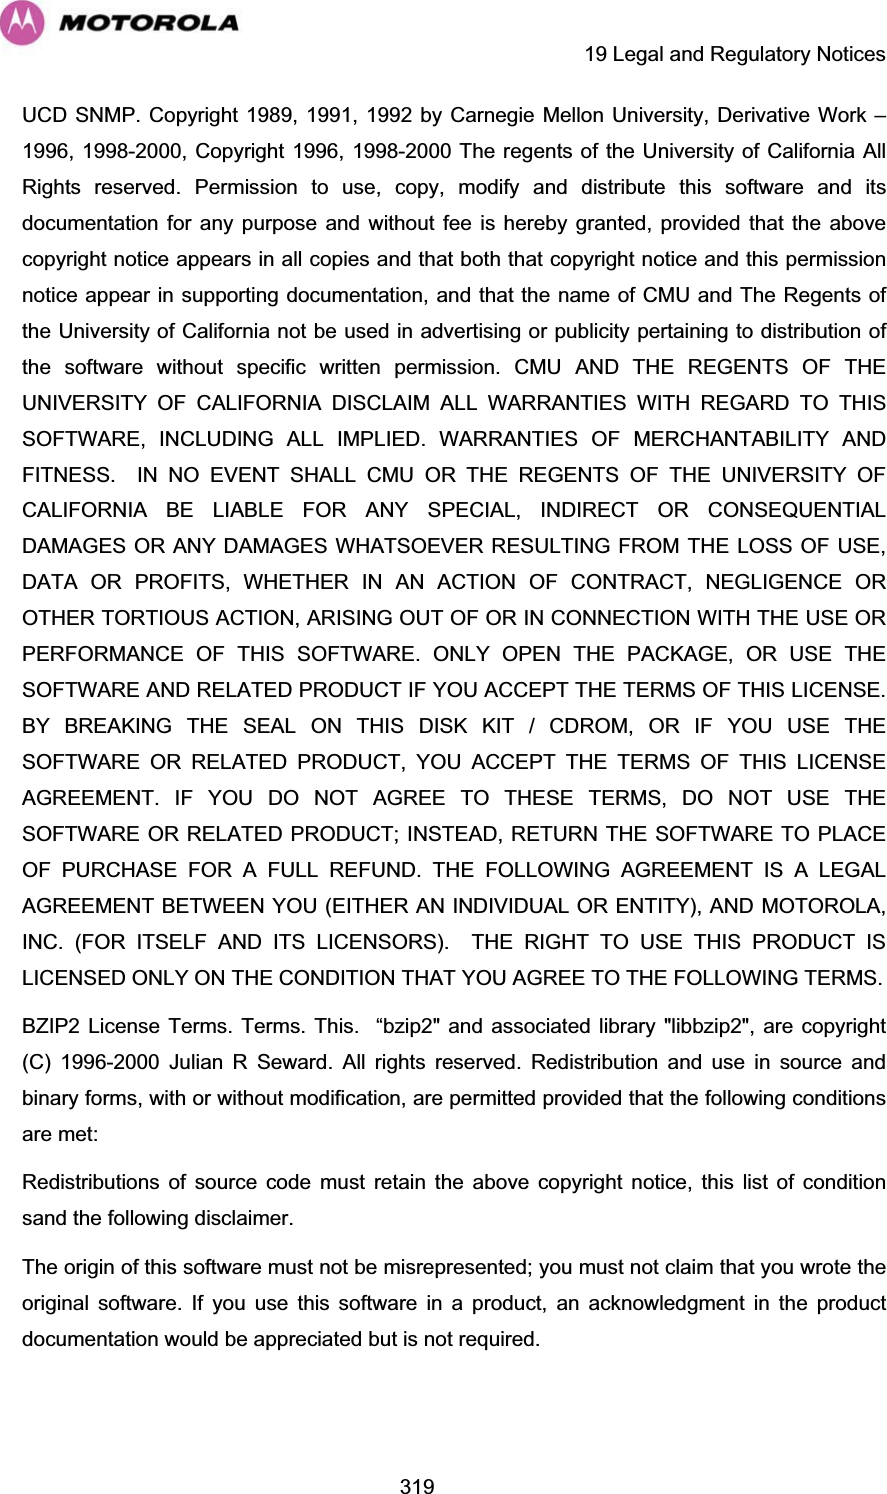     19 Legal and Regulatory Notices  319UCD SNMP. Copyright 1989, 1991, 1992 by Carnegie Mellon University, Derivative Work – 1996, 1998-2000, Copyright 1996, 1998-2000 The regents of the University of California All Rights reserved. Permission to use, copy, modify and distribute this software and its documentation for any purpose and without fee is hereby granted, provided that the above copyright notice appears in all copies and that both that copyright notice and this permission notice appear in supporting documentation, and that the name of CMU and The Regents of the University of California not be used in advertising or publicity pertaining to distribution of the software without specific written permission. CMU AND THE REGENTS OF THE UNIVERSITY OF CALIFORNIA DISCLAIM ALL WARRANTIES WITH REGARD TO THIS SOFTWARE, INCLUDING ALL IMPLIED. WARRANTIES OF MERCHANTABILITY AND FITNESS.  IN NO EVENT SHALL CMU OR THE REGENTS OF THE UNIVERSITY OF CALIFORNIA BE LIABLE FOR ANY SPECIAL, INDIRECT OR CONSEQUENTIAL DAMAGES OR ANY DAMAGES WHATSOEVER RESULTING FROM THE LOSS OF USE, DATA OR PROFITS, WHETHER IN AN ACTION OF CONTRACT, NEGLIGENCE OR OTHER TORTIOUS ACTION, ARISING OUT OF OR IN CONNECTION WITH THE USE OR PERFORMANCE OF THIS SOFTWARE. ONLY OPEN THE PACKAGE, OR USE THE SOFTWARE AND RELATED PRODUCT IF YOU ACCEPT THE TERMS OF THIS LICENSE. BY BREAKING THE SEAL ON THIS DISK KIT / CDROM, OR IF YOU USE THE SOFTWARE OR RELATED PRODUCT, YOU ACCEPT THE TERMS OF THIS LICENSE AGREEMENT. IF YOU DO NOT AGREE TO THESE TERMS, DO NOT USE THE SOFTWARE OR RELATED PRODUCT; INSTEAD, RETURN THE SOFTWARE TO PLACE OF PURCHASE FOR A FULL REFUND. THE FOLLOWING AGREEMENT IS A LEGAL AGREEMENT BETWEEN YOU (EITHER AN INDIVIDUAL OR ENTITY), AND MOTOROLA, INC. (FOR ITSELF AND ITS LICENSORS).  THE RIGHT TO USE THIS PRODUCT IS LICENSED ONLY ON THE CONDITION THAT YOU AGREE TO THE FOLLOWING TERMS. BZIP2 License Terms. Terms. This.  “bzip2&quot; and associated library &quot;libbzip2&quot;, are copyright (C) 1996-2000 Julian R Seward. All rights reserved. Redistribution and use in source and binary forms, with or without modification, are permitted provided that the following conditions are met: Redistributions of source code must retain the above copyright notice, this list of condition sand the following disclaimer.The origin of this software must not be misrepresented; you must not claim that you wrote the original software. If you use this software in a product, an acknowledgment in the product documentation would be appreciated but is not required. 